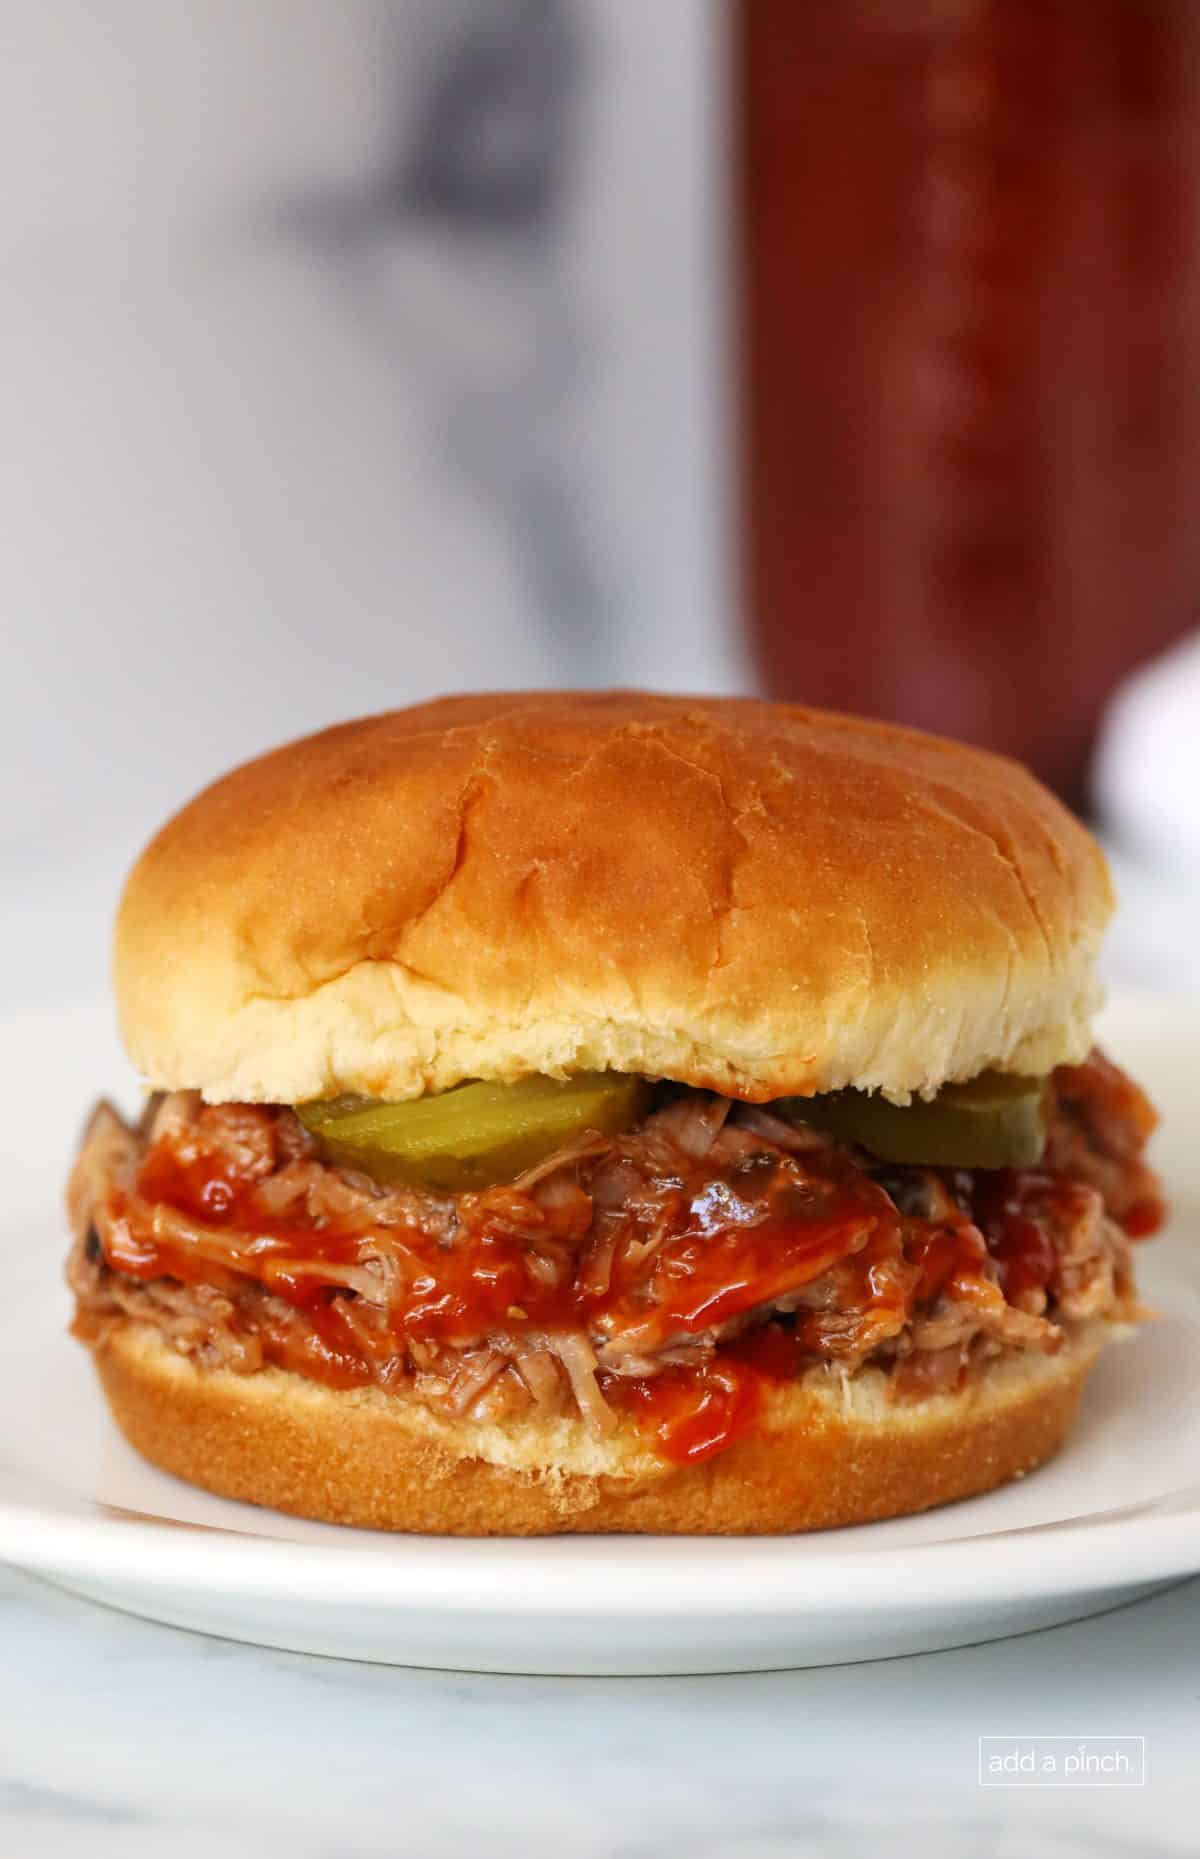 Photograph of pulled pork sandwich with additional bbq sauce and pickles. // addapinch.com